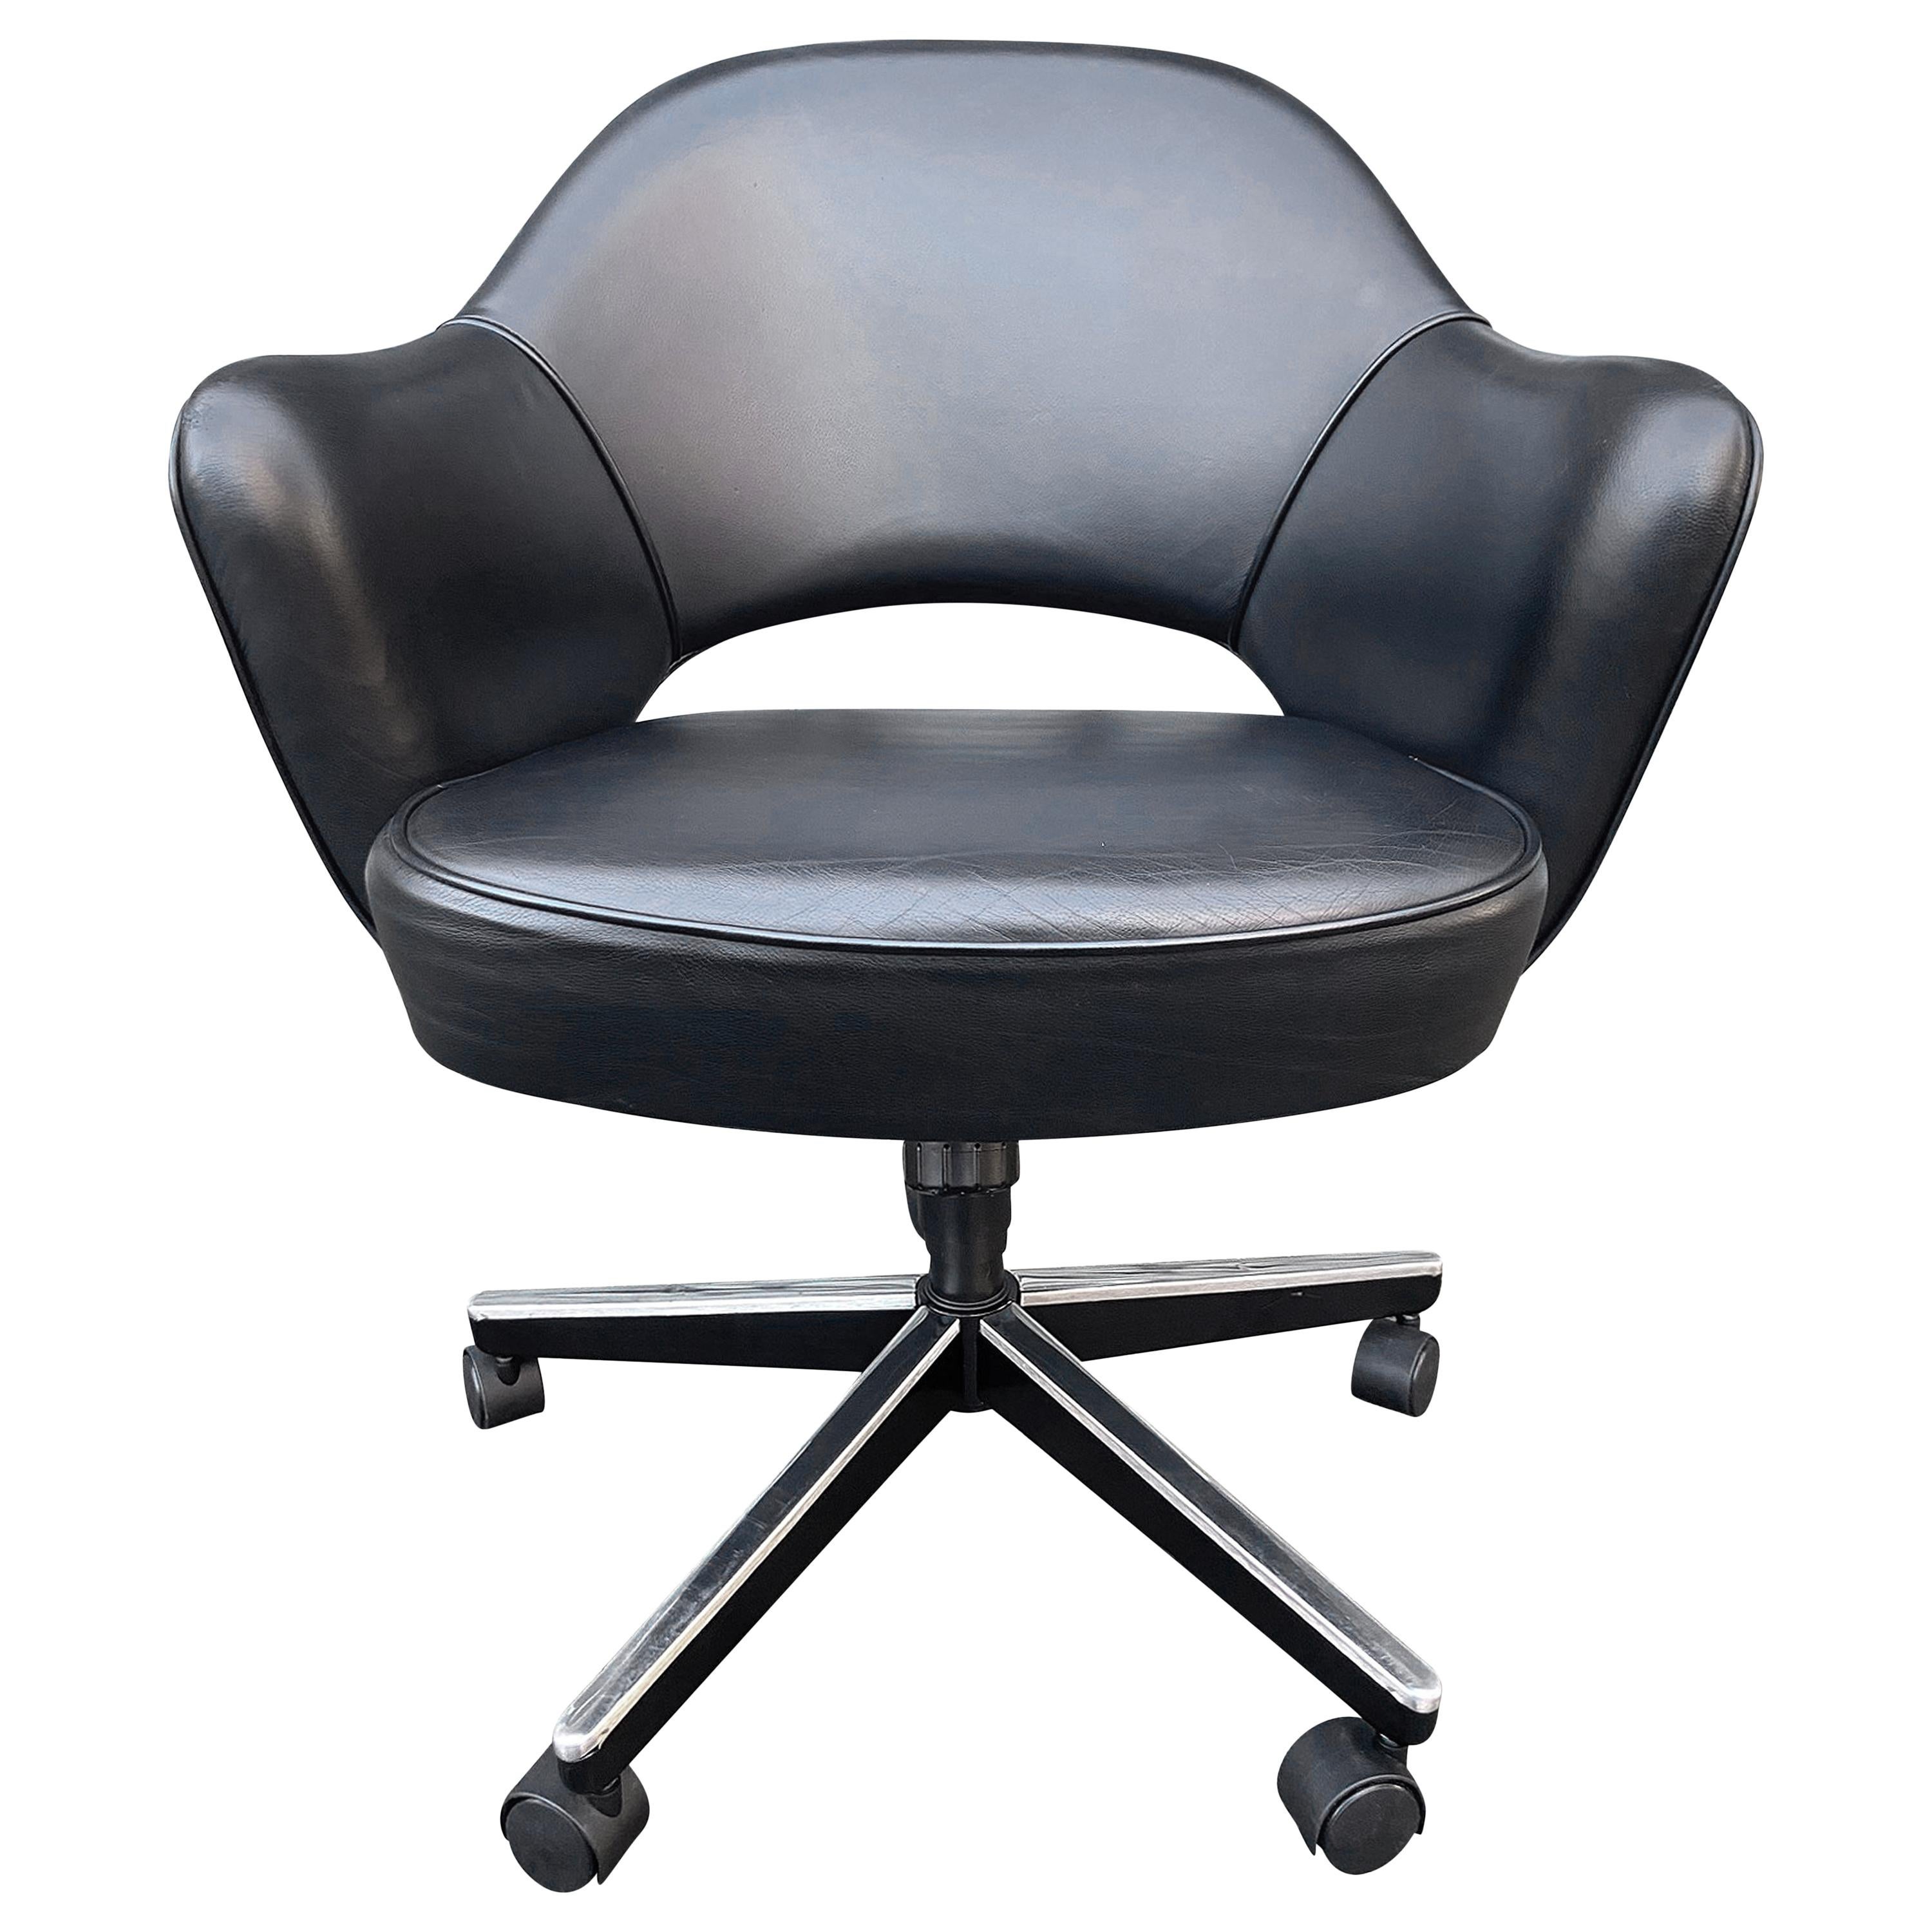 Midcentury Saarinen executive chairs in black leather. All with adjustable manual height and tilt positions. This iconic design has been a favorite in both the home and corporate settings due to its sharp looks and comfort. Seat height adjustable to